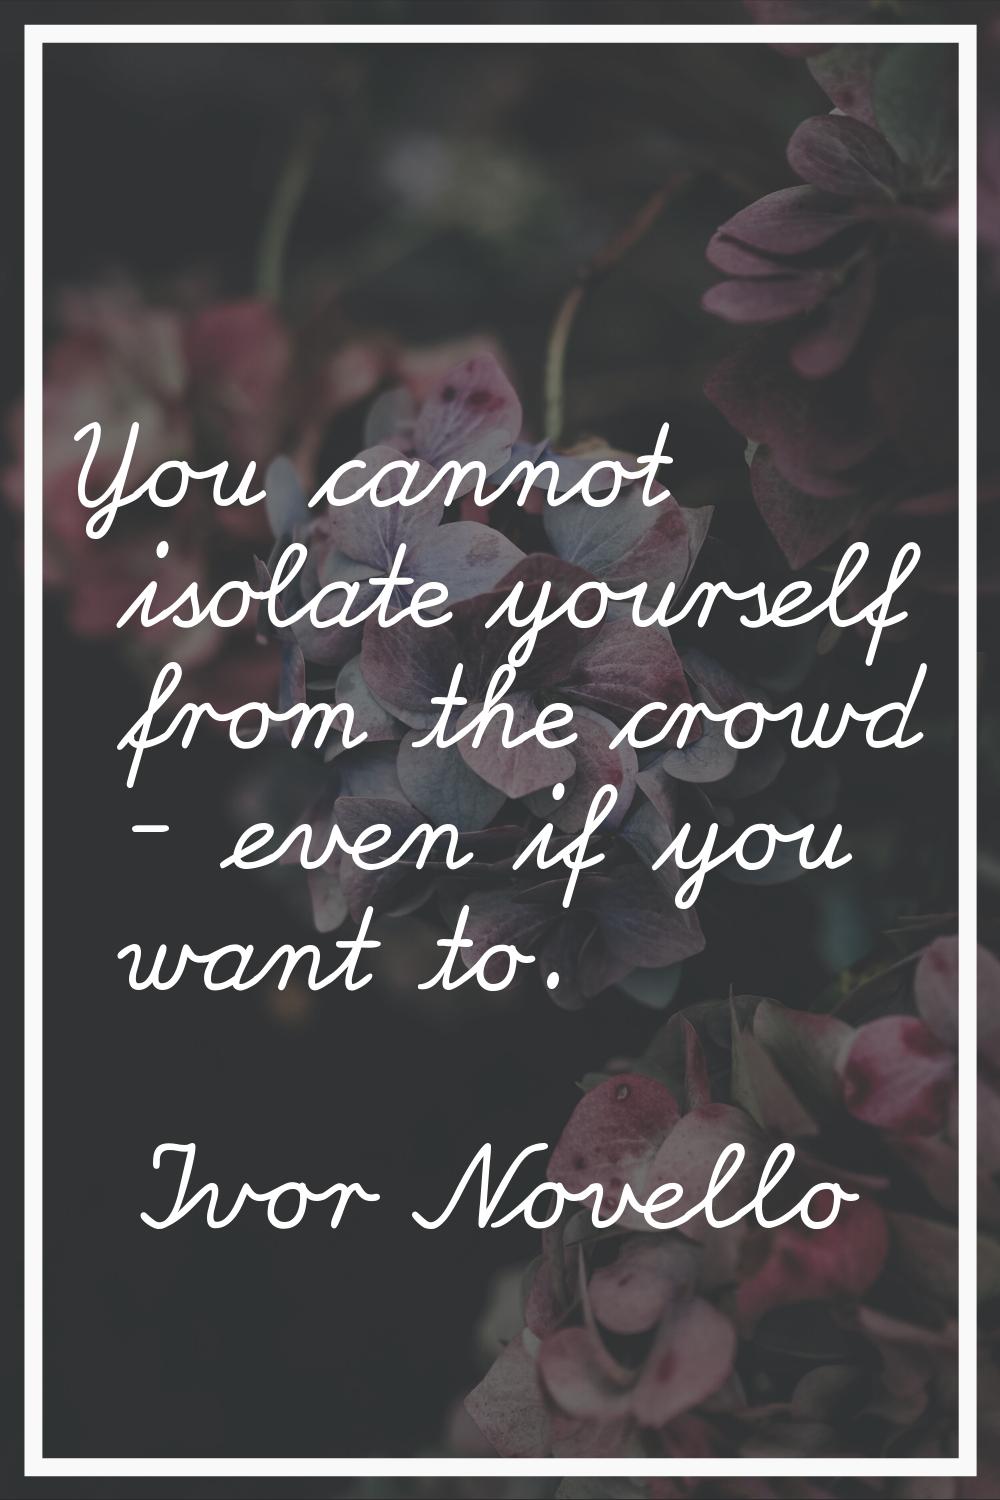 You cannot isolate yourself from the crowd - even if you want to.